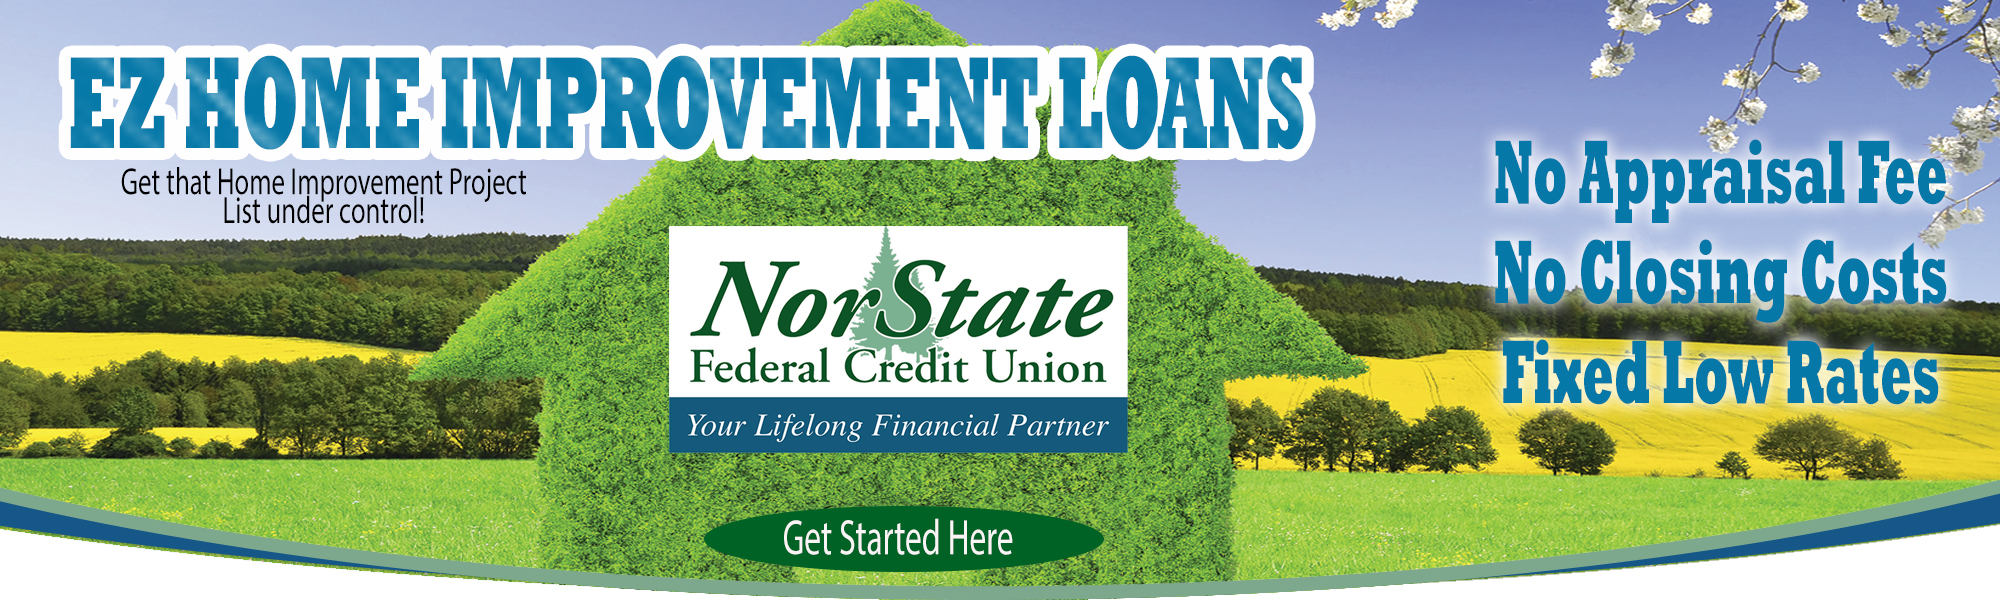 Norstate Federal Credit Union